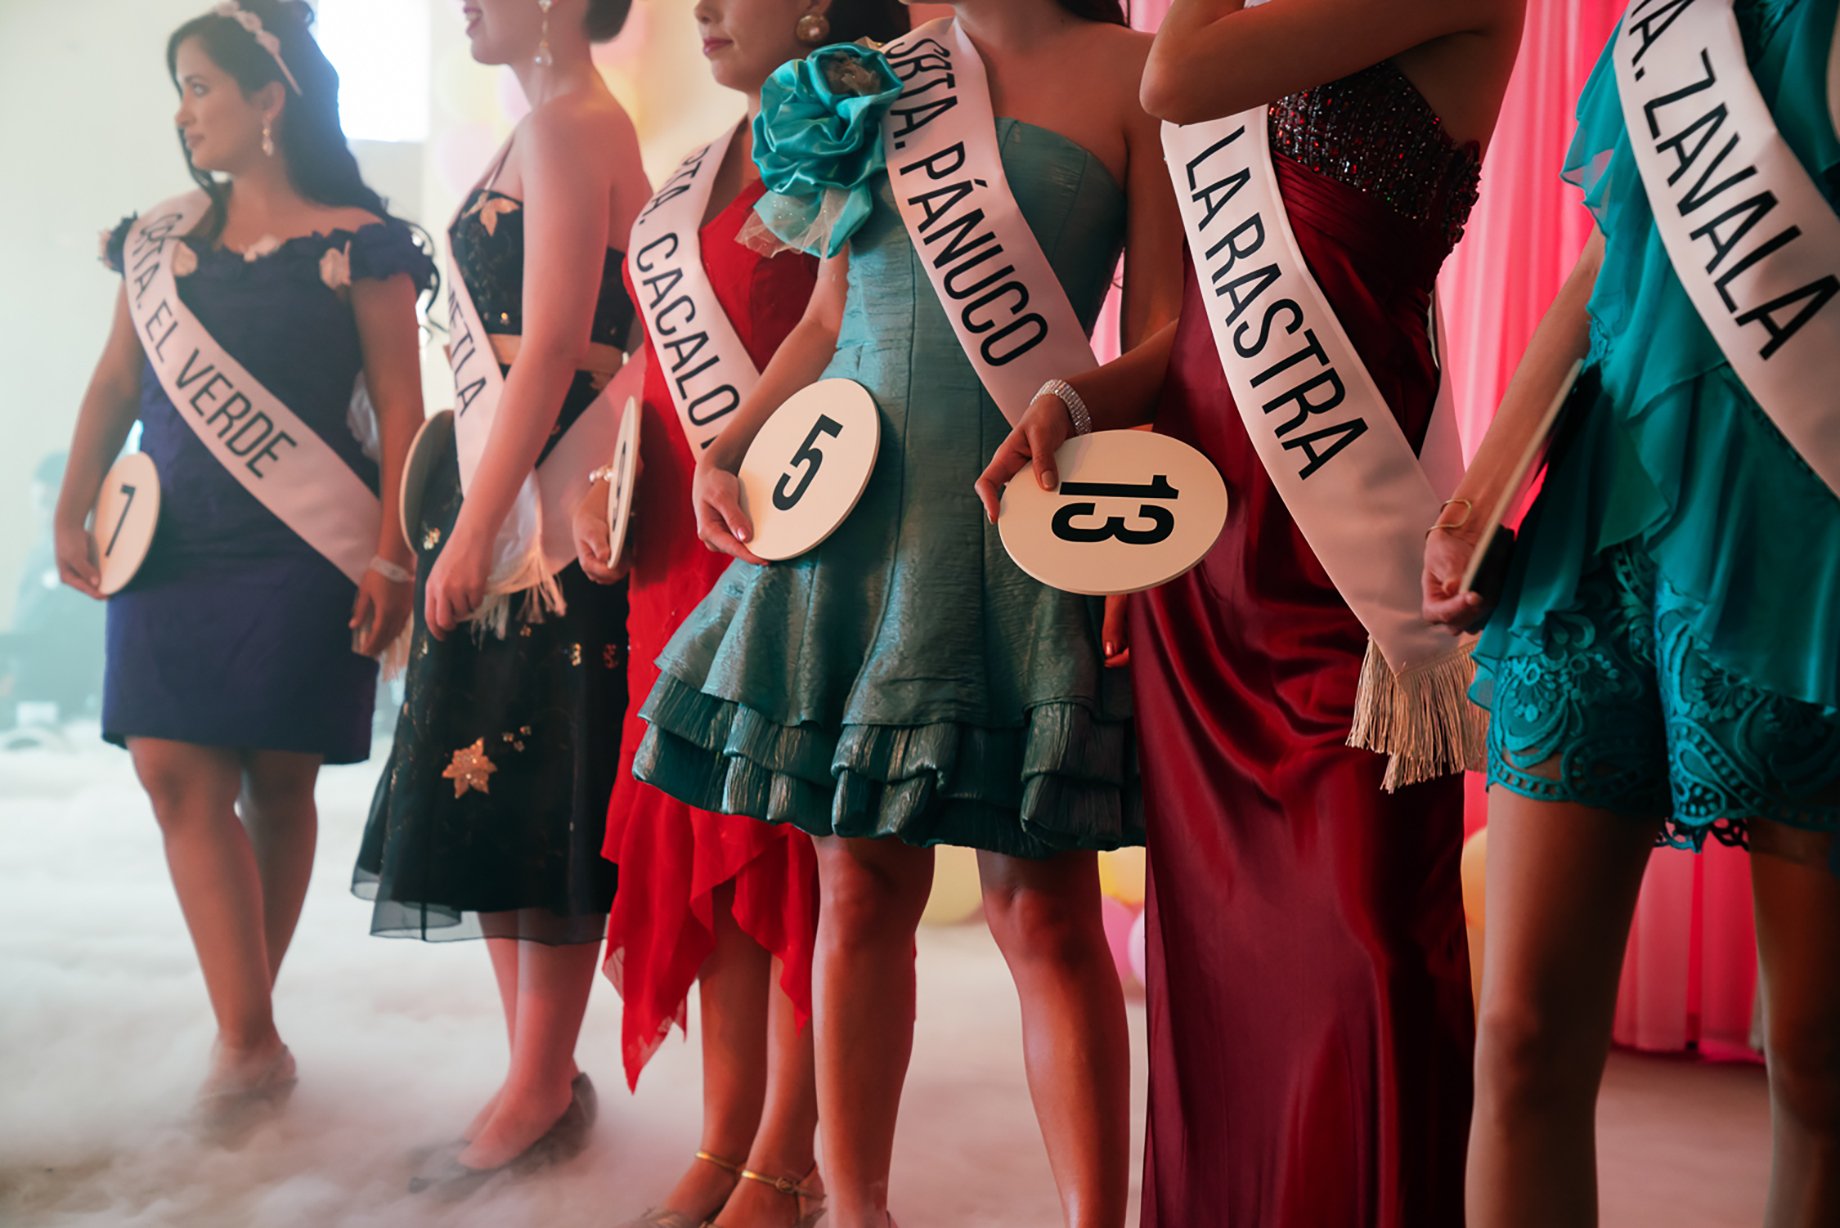 Sashes and numbers of pageant contestants for Narcos: Mexico season 3 shot by Nicole Franco for Netflix